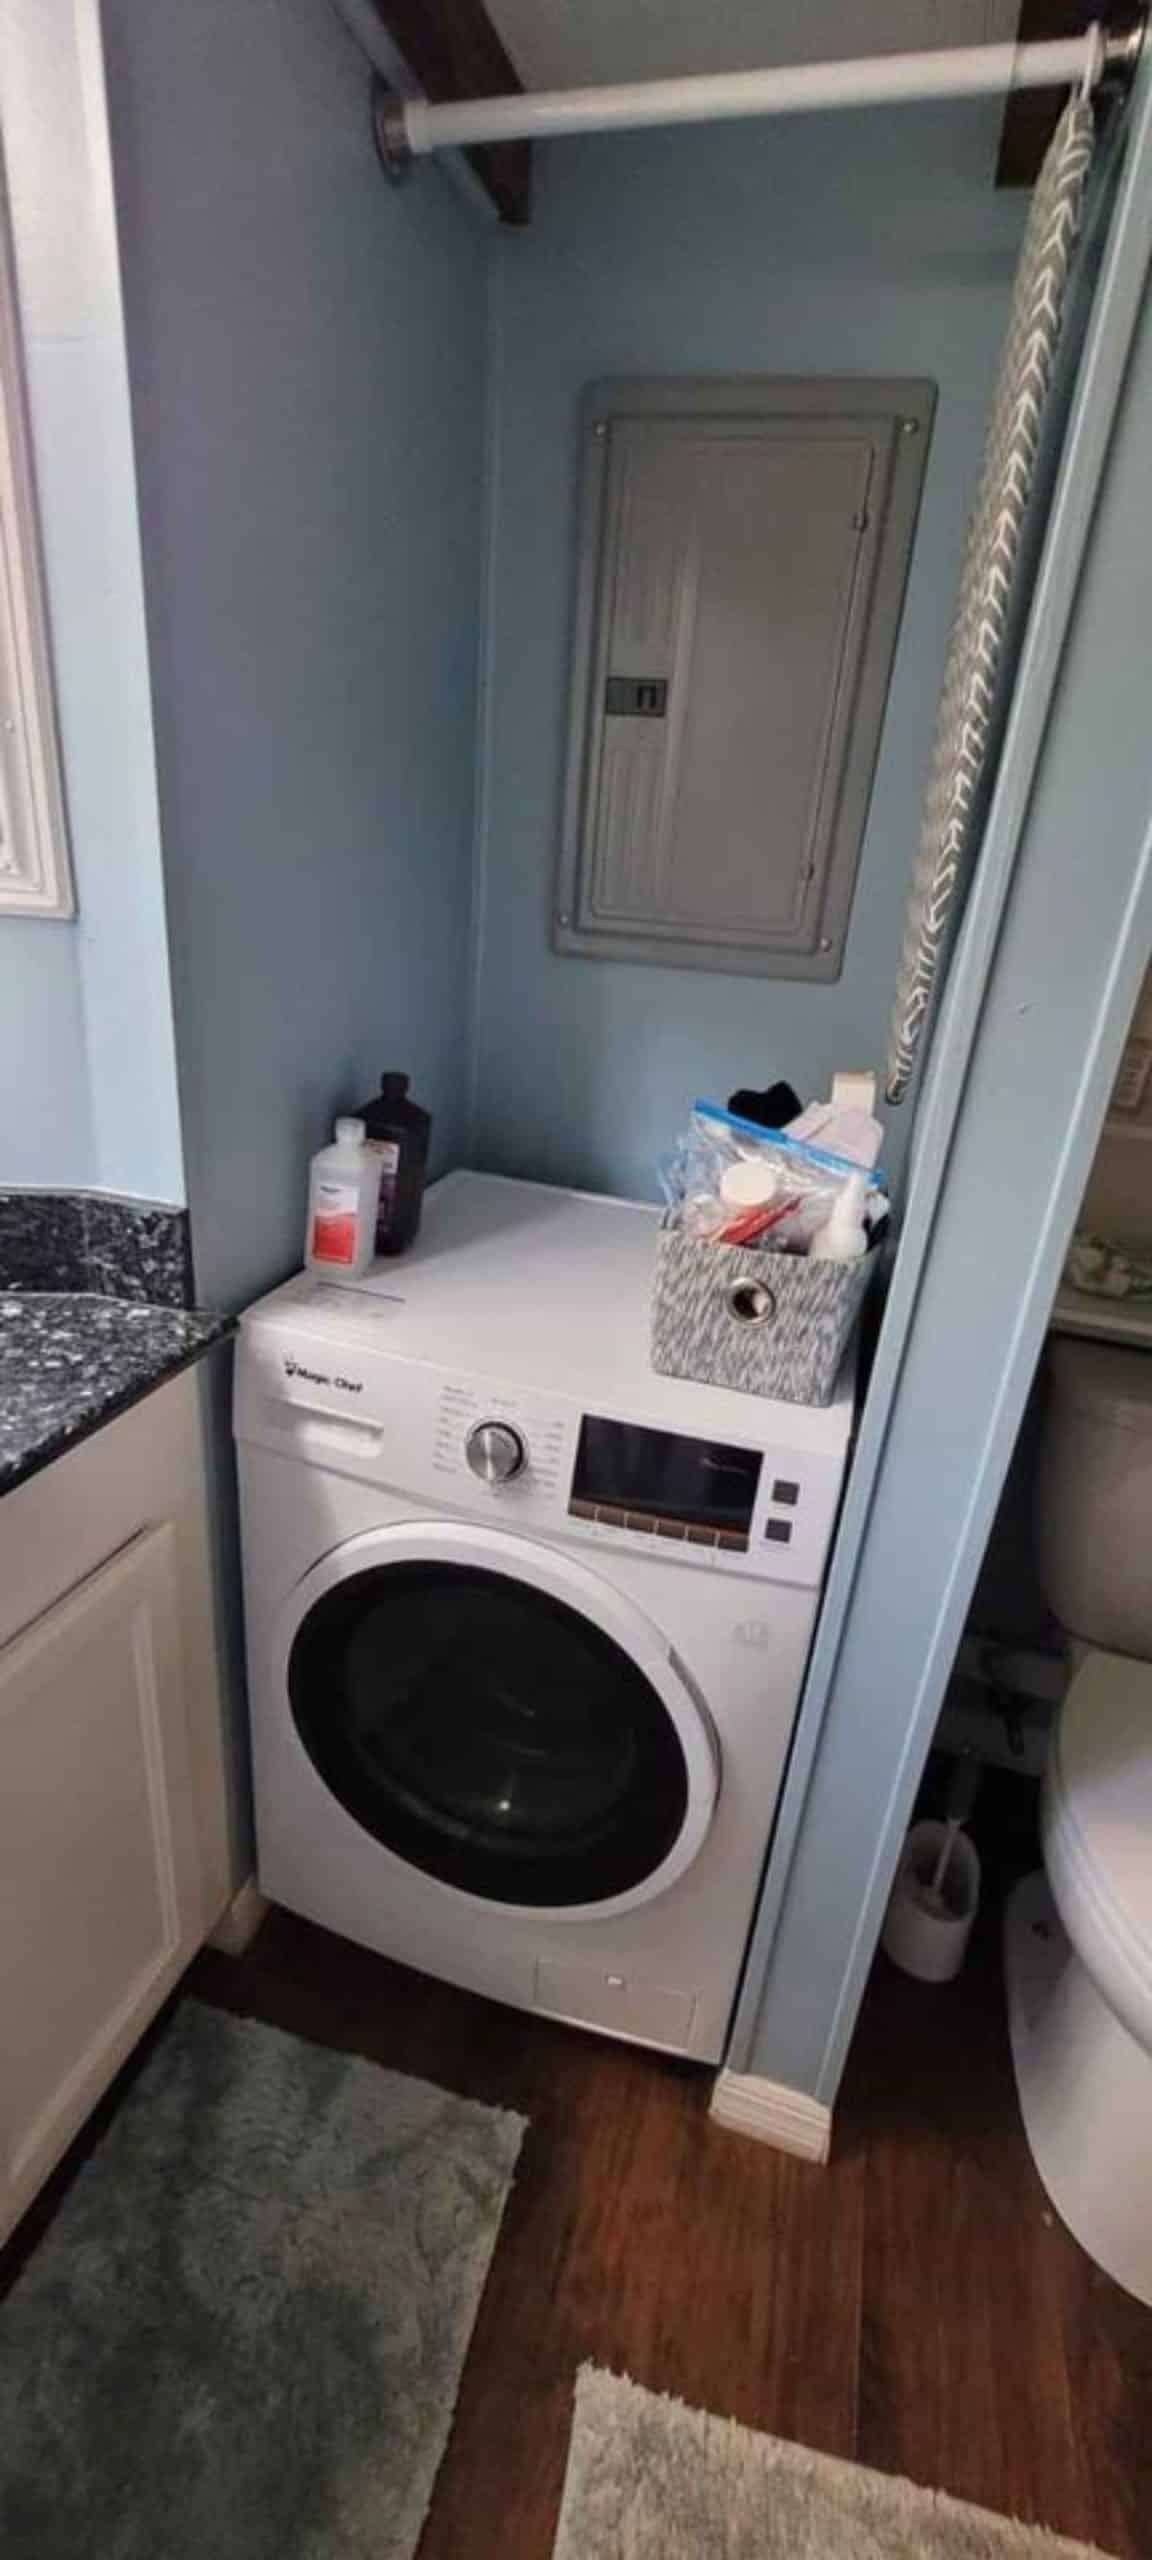 washer dryer combo included in the bathroom of the house